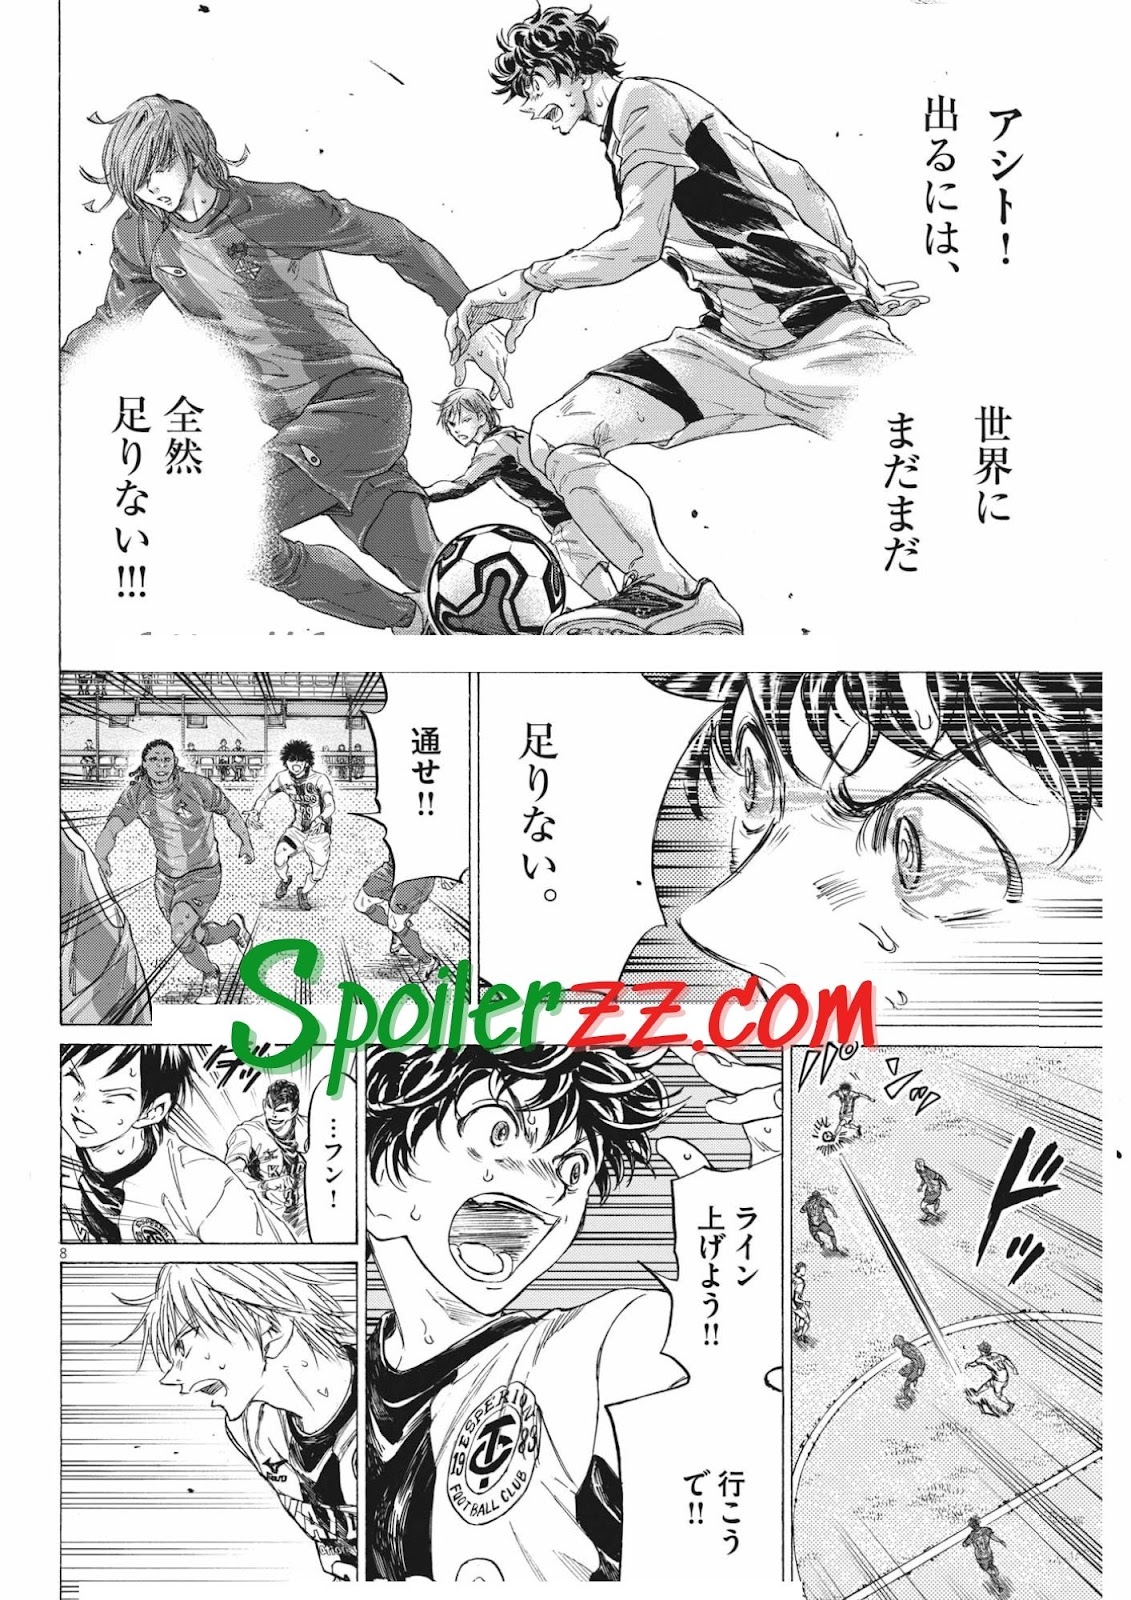 Ao Ashi chapter 352 release date, time, spoilers, where to read online -  The SportsGrail